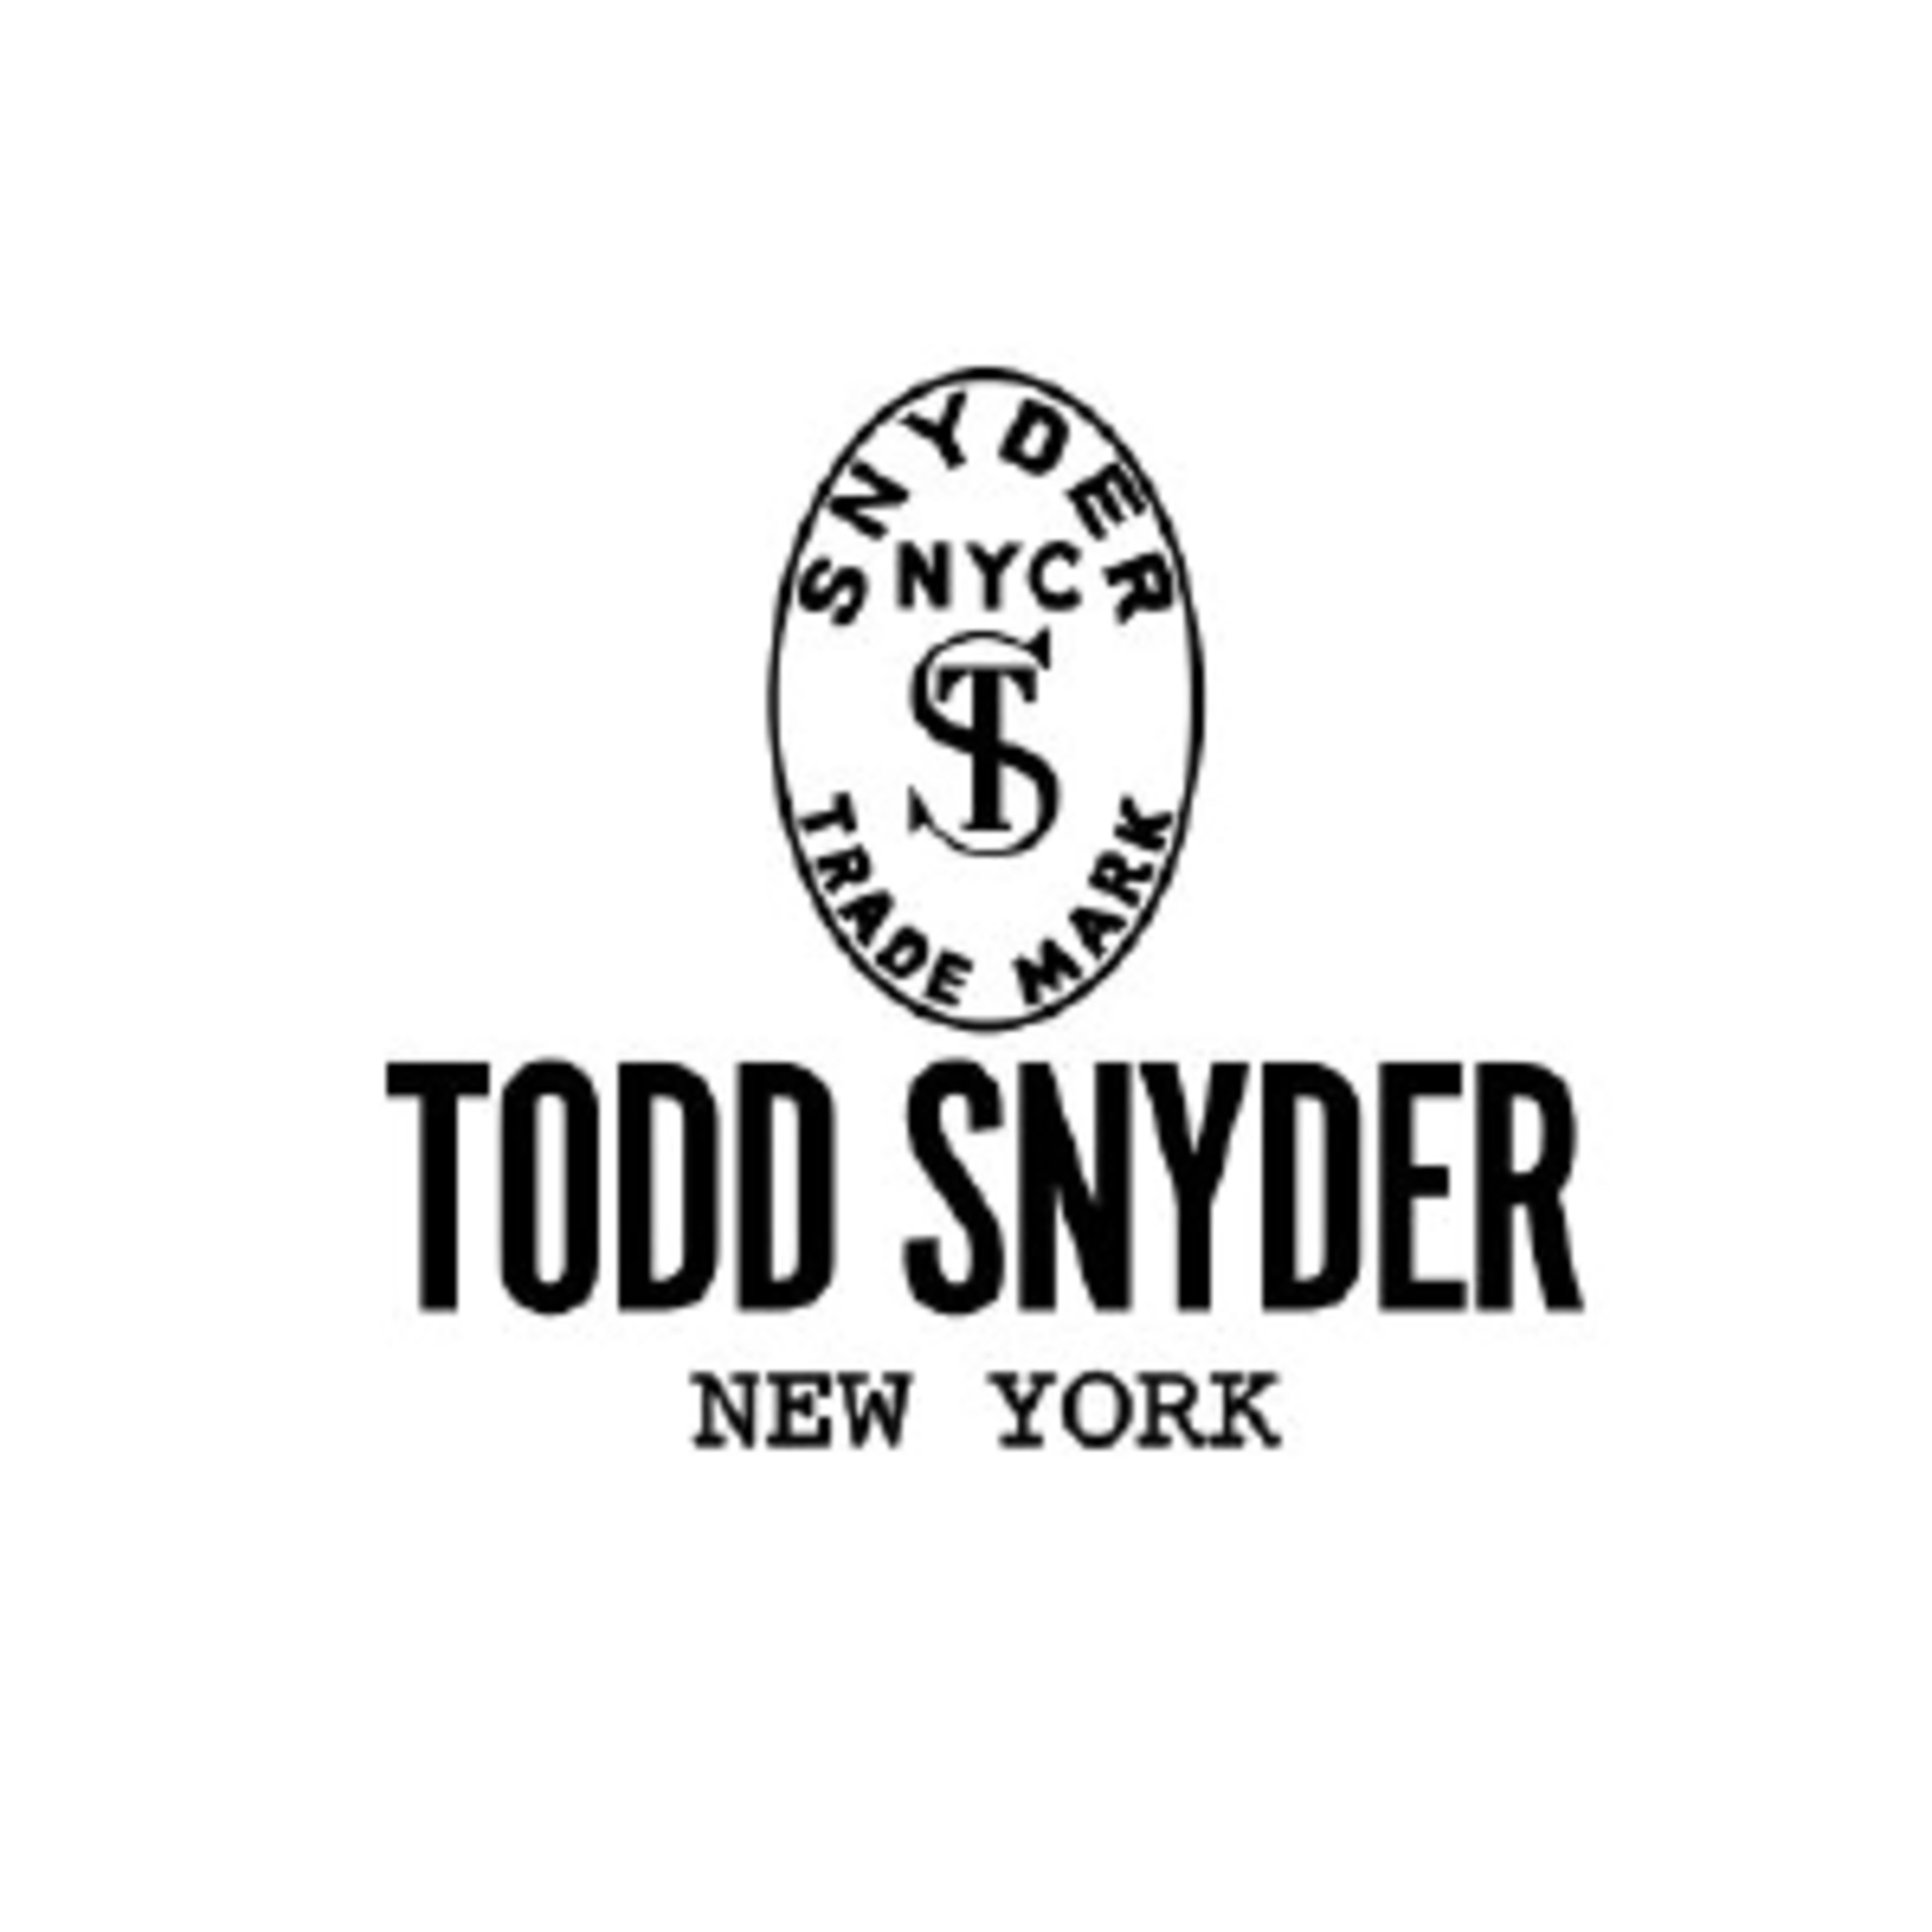 Todd SnyderCode